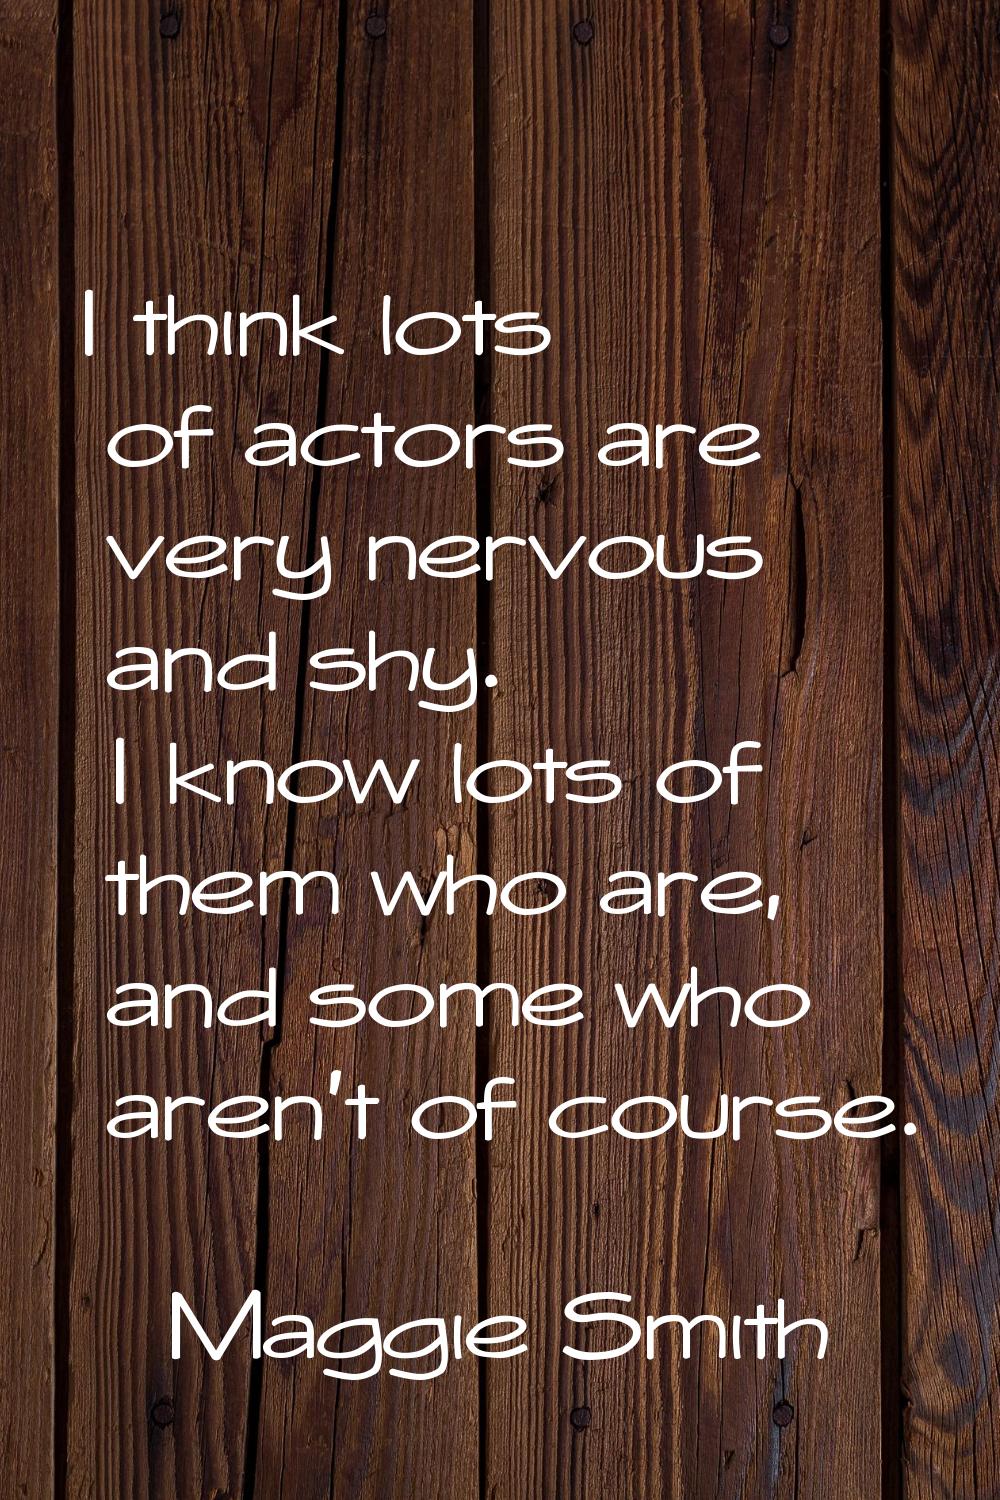 I think lots of actors are very nervous and shy. I know lots of them who are, and some who aren't o